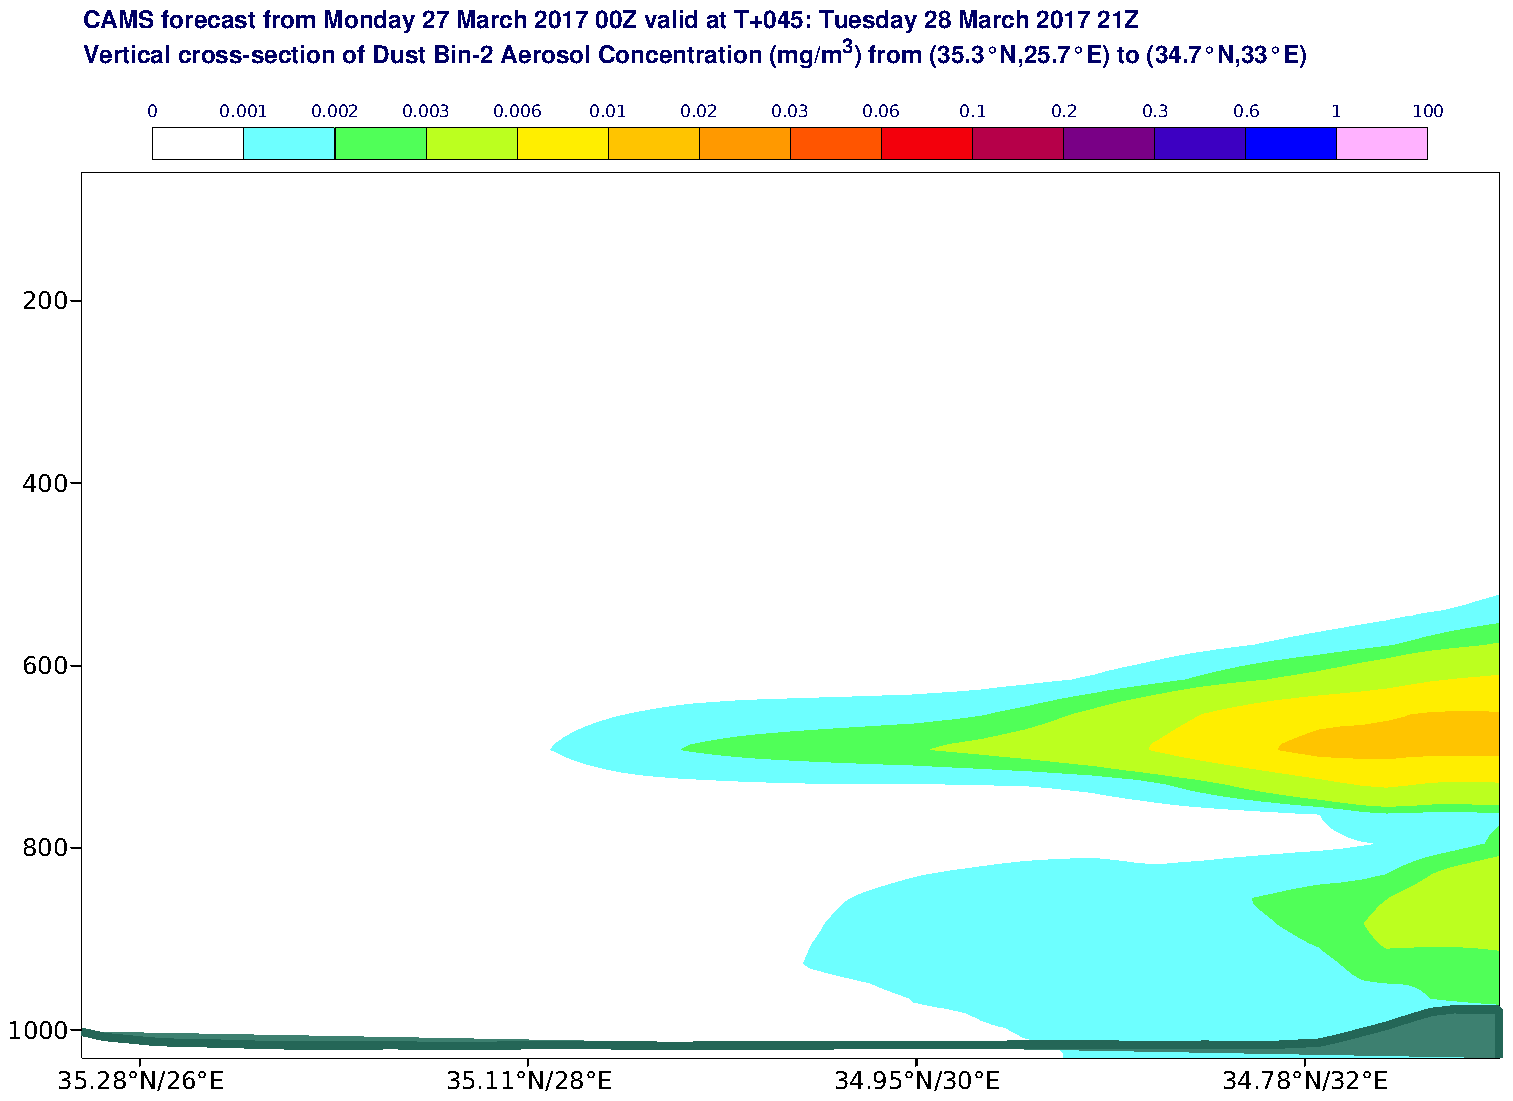 Vertical cross-section of Dust Bin-2 Aerosol Concentration (mg/m3) valid at T45 - 2017-03-28 21:00